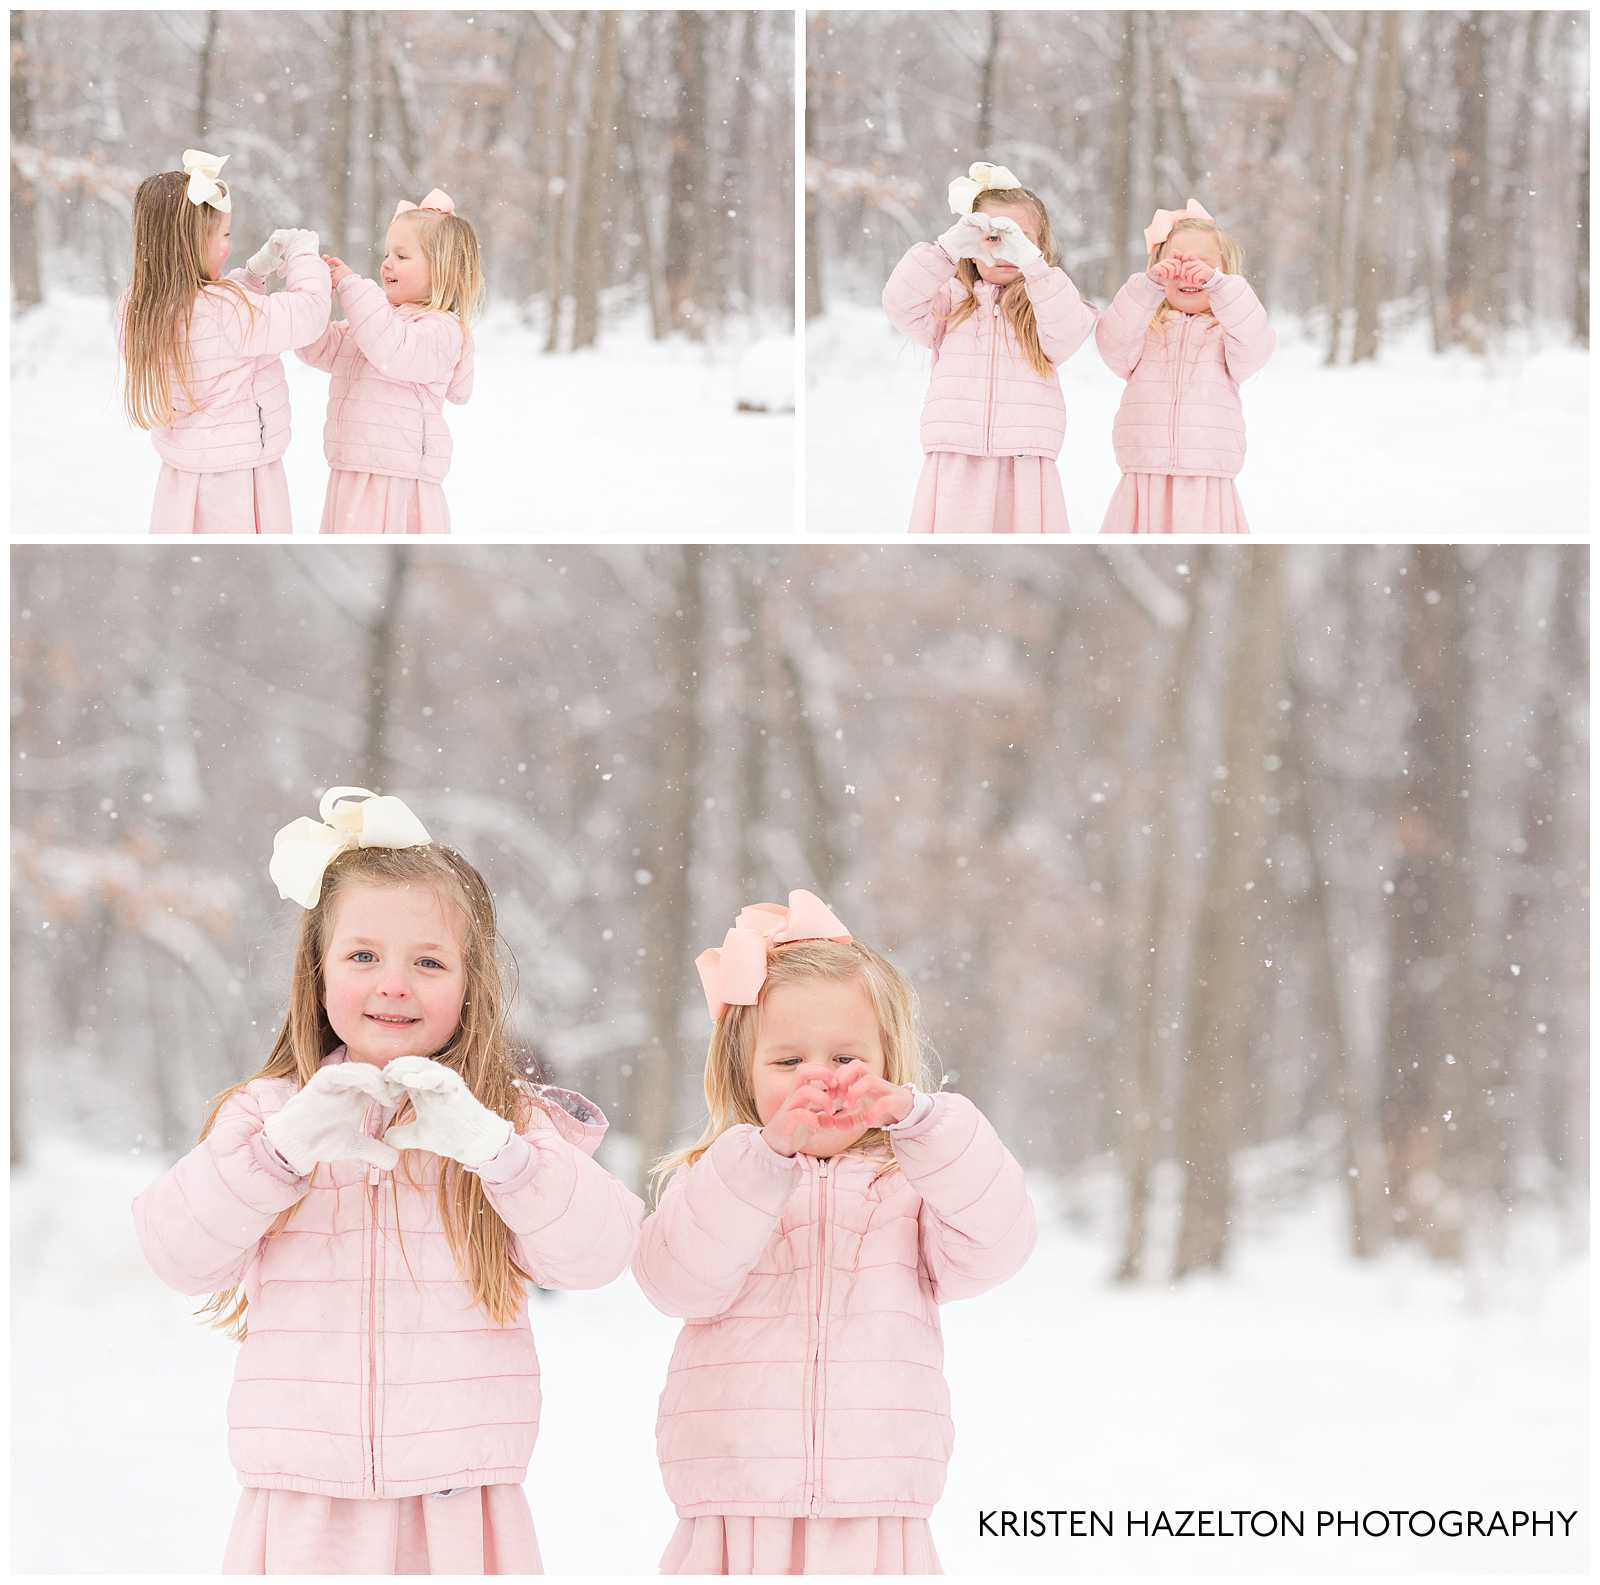 Two sisters making hearts with their hands at a snowfall photoshoot